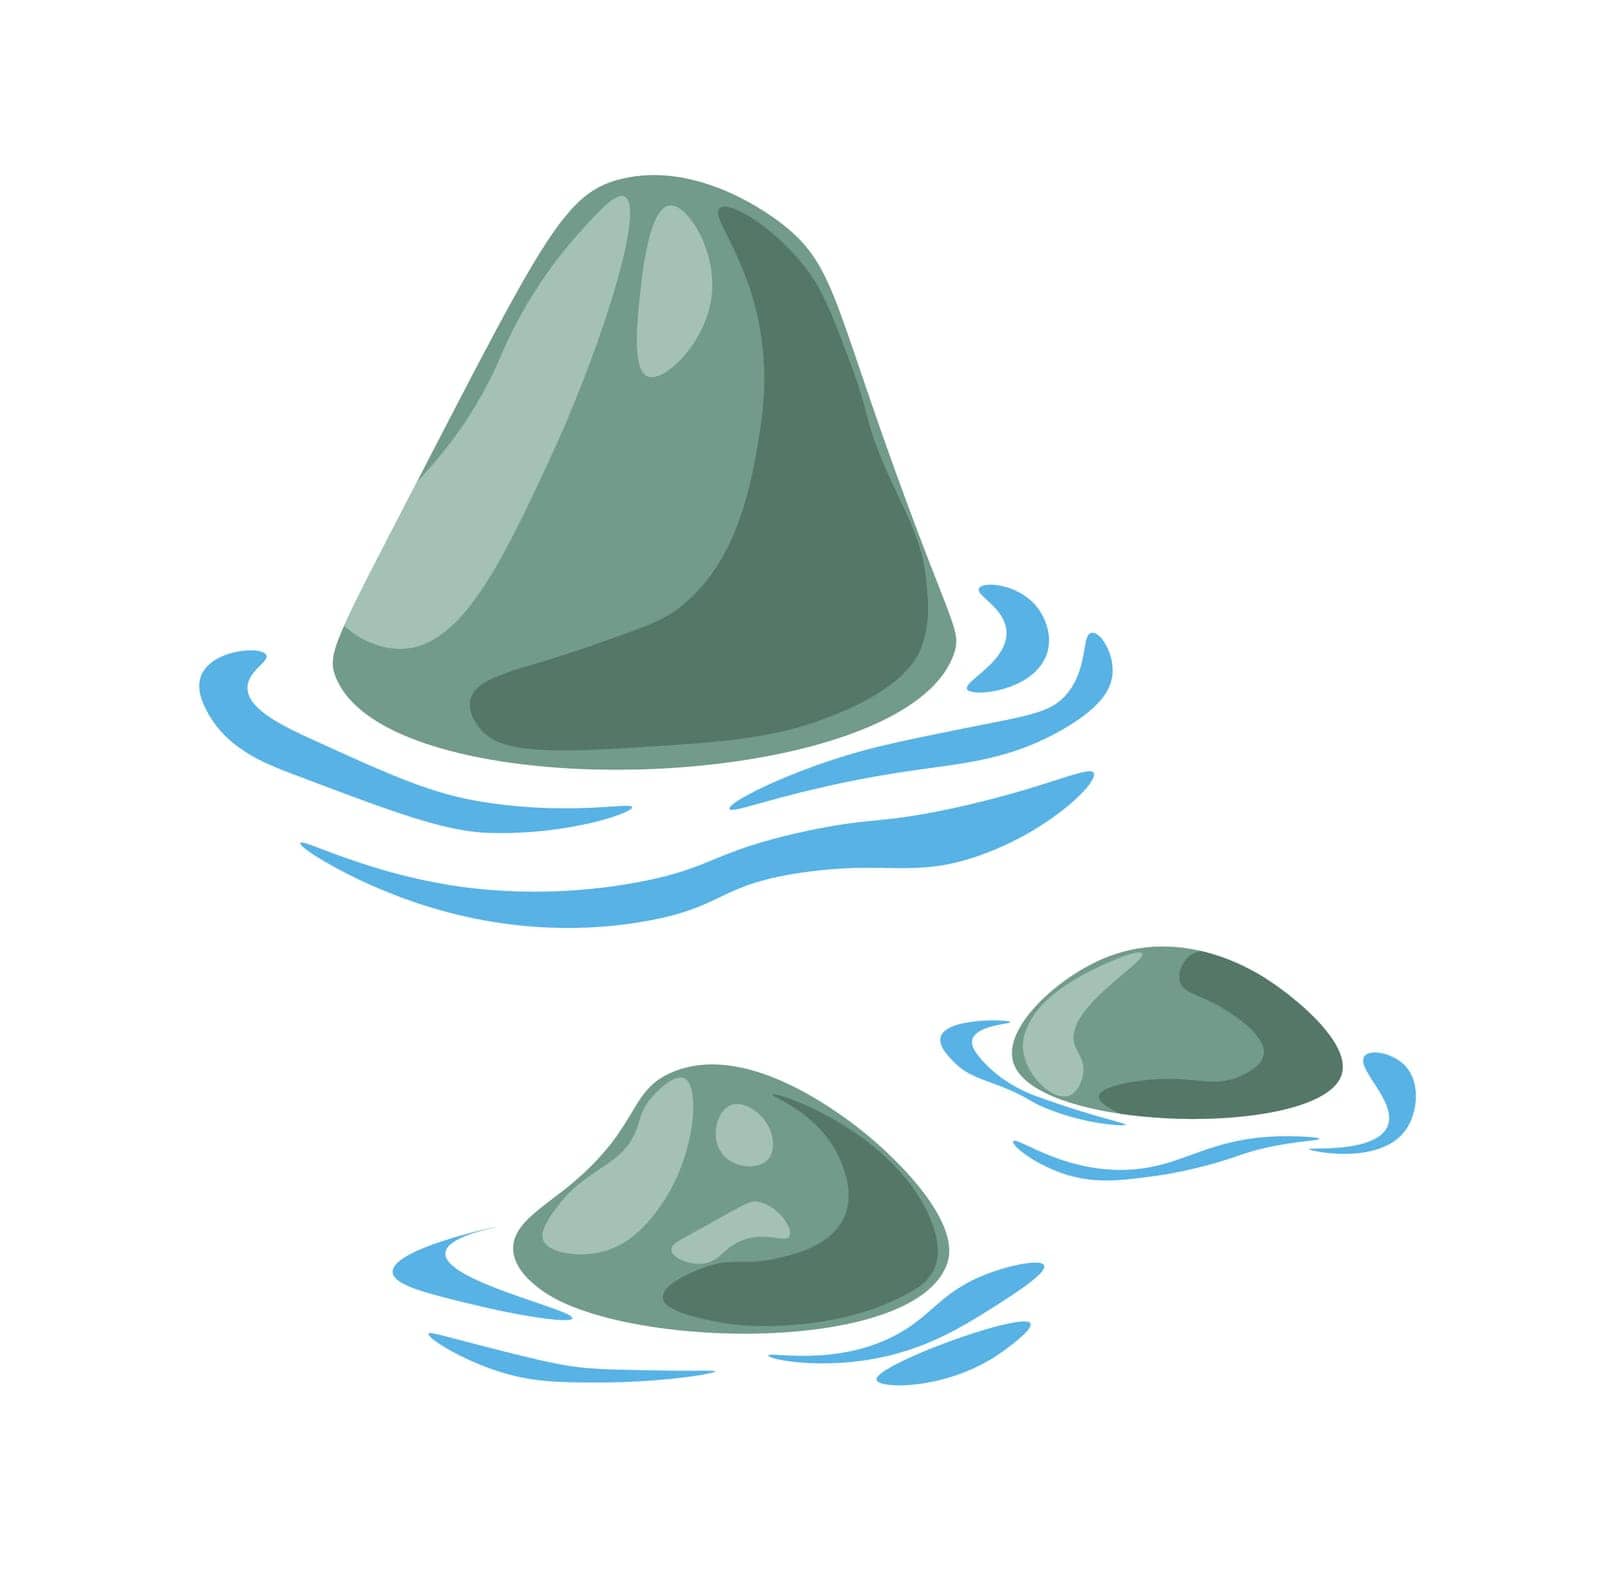 Stones in water. Decorative element of natural or artificially created reservoir. Calming atmosphere. Isolated rocks with waves around. Aesthetic appeal of aquatic environments. Vector in flat style